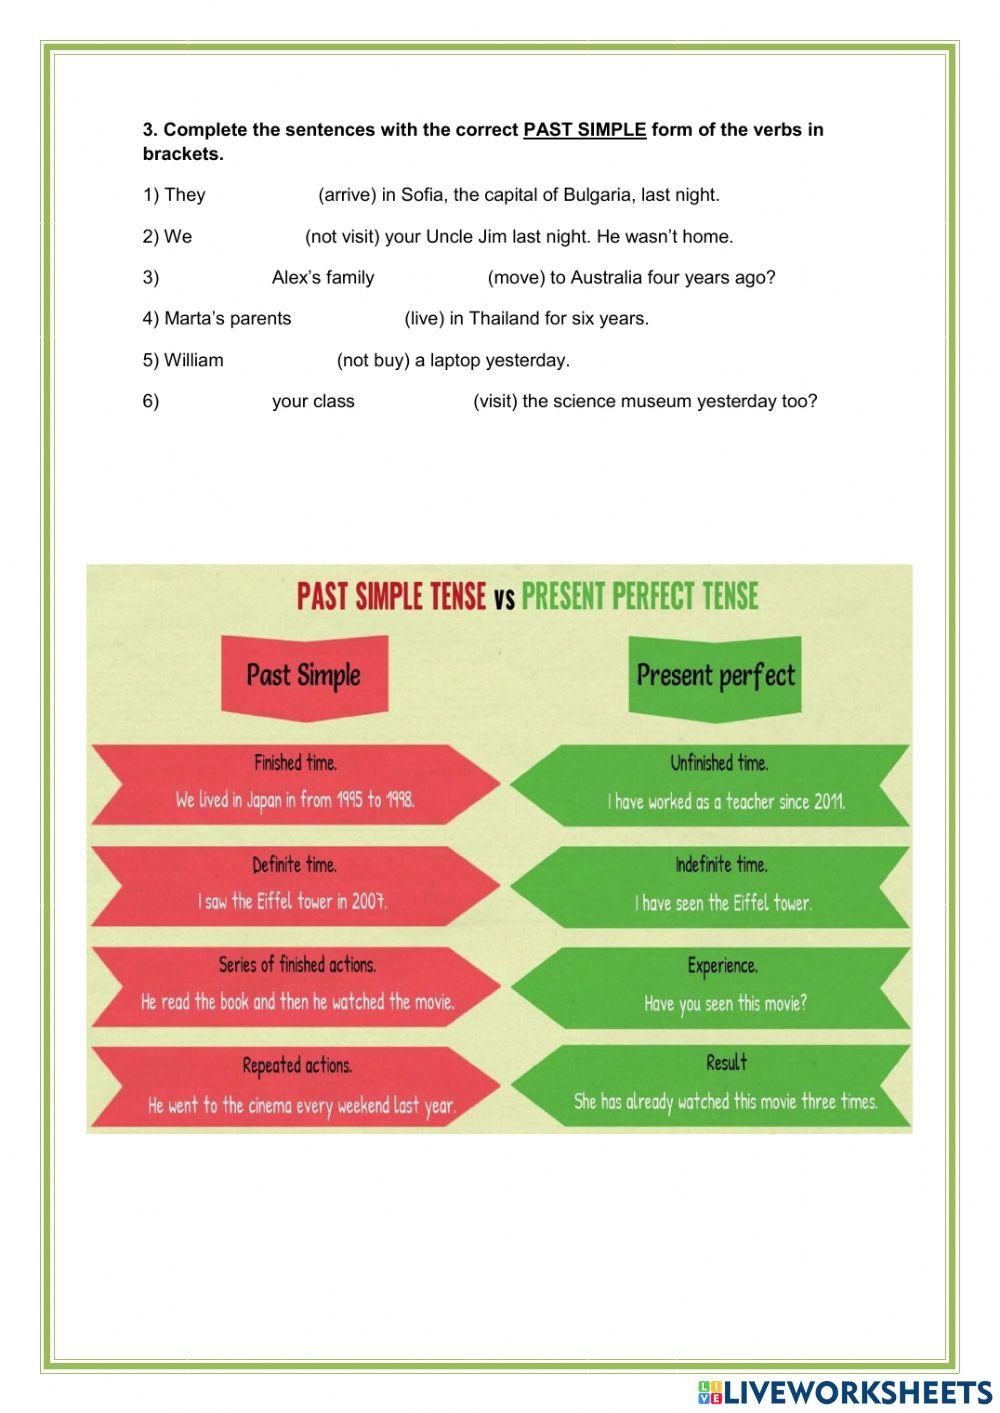 Grammar 1: Past simple and present perfect